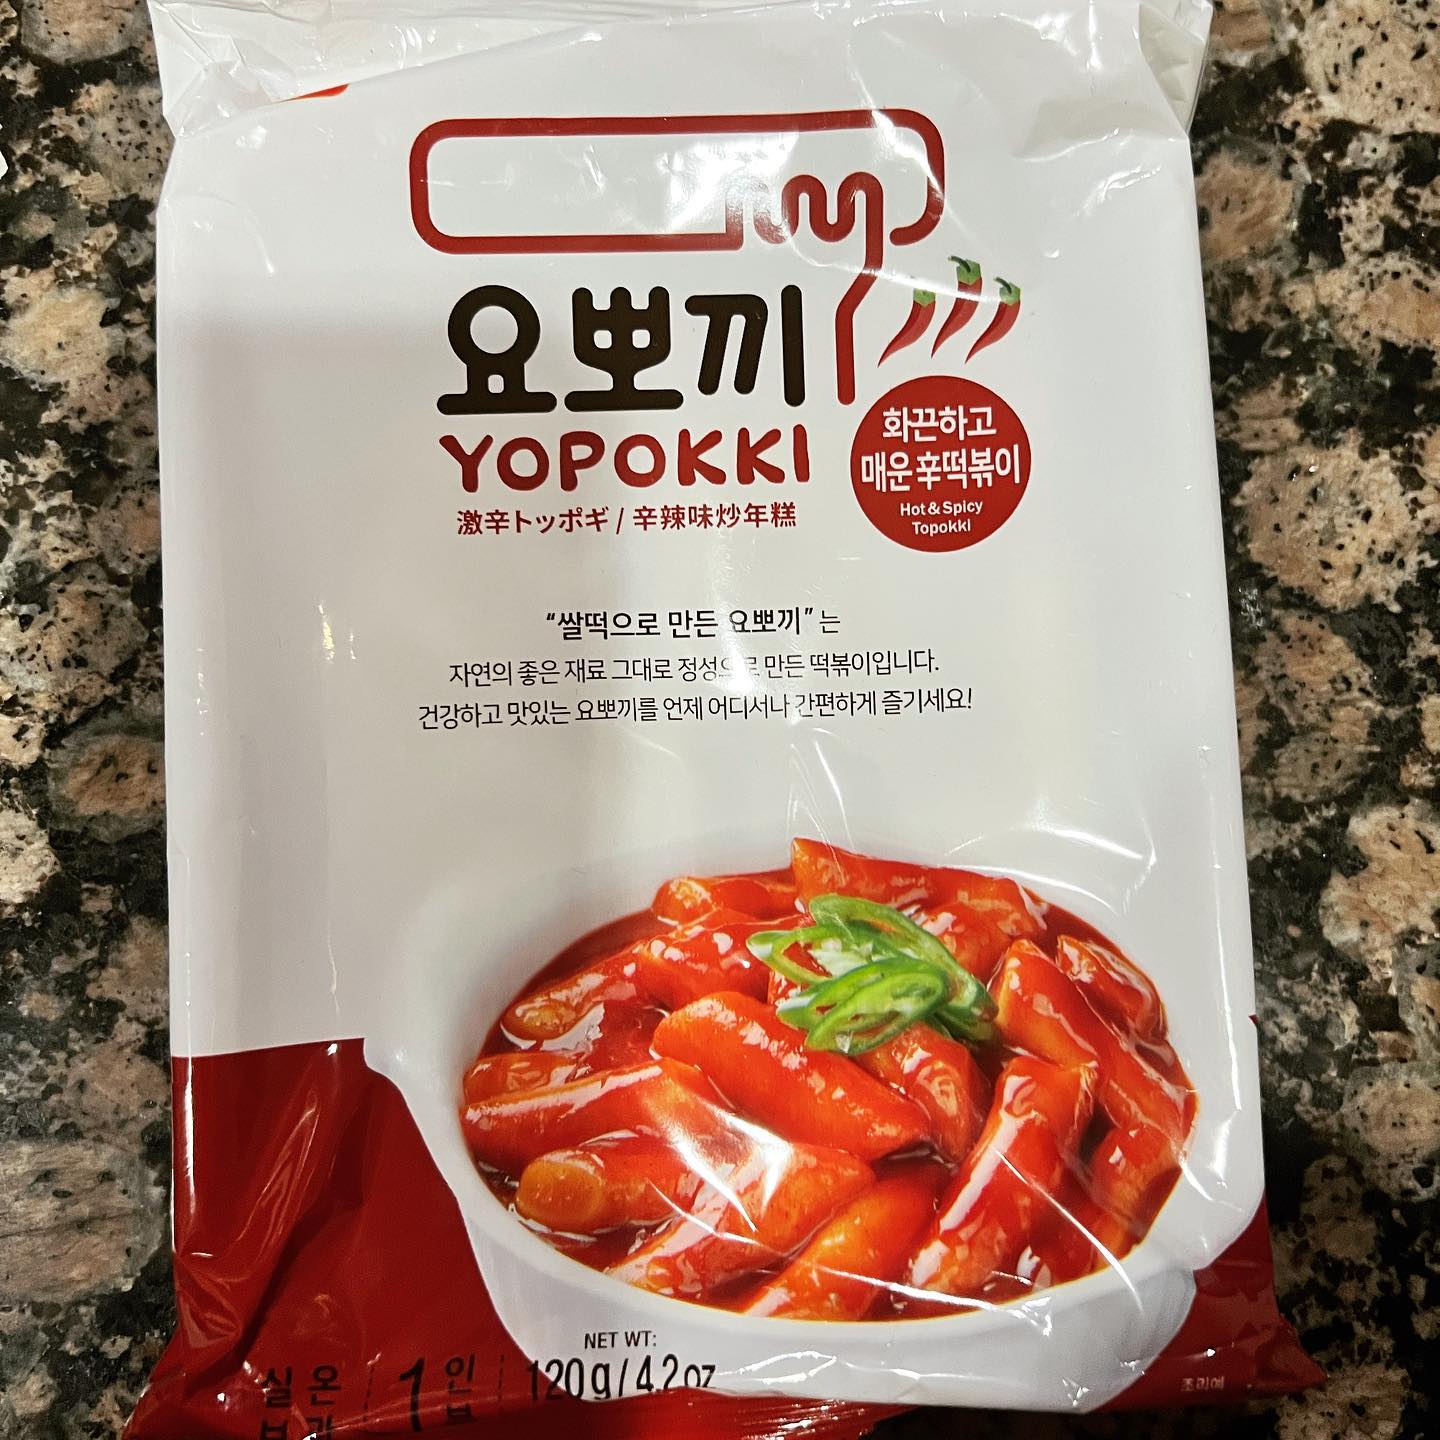 Listen… I eat a lot of spicy food… but this little package of tteokbokki just kicked my ass, like my teeth are hurting right now and I’m sweating. I kinda needed it though.